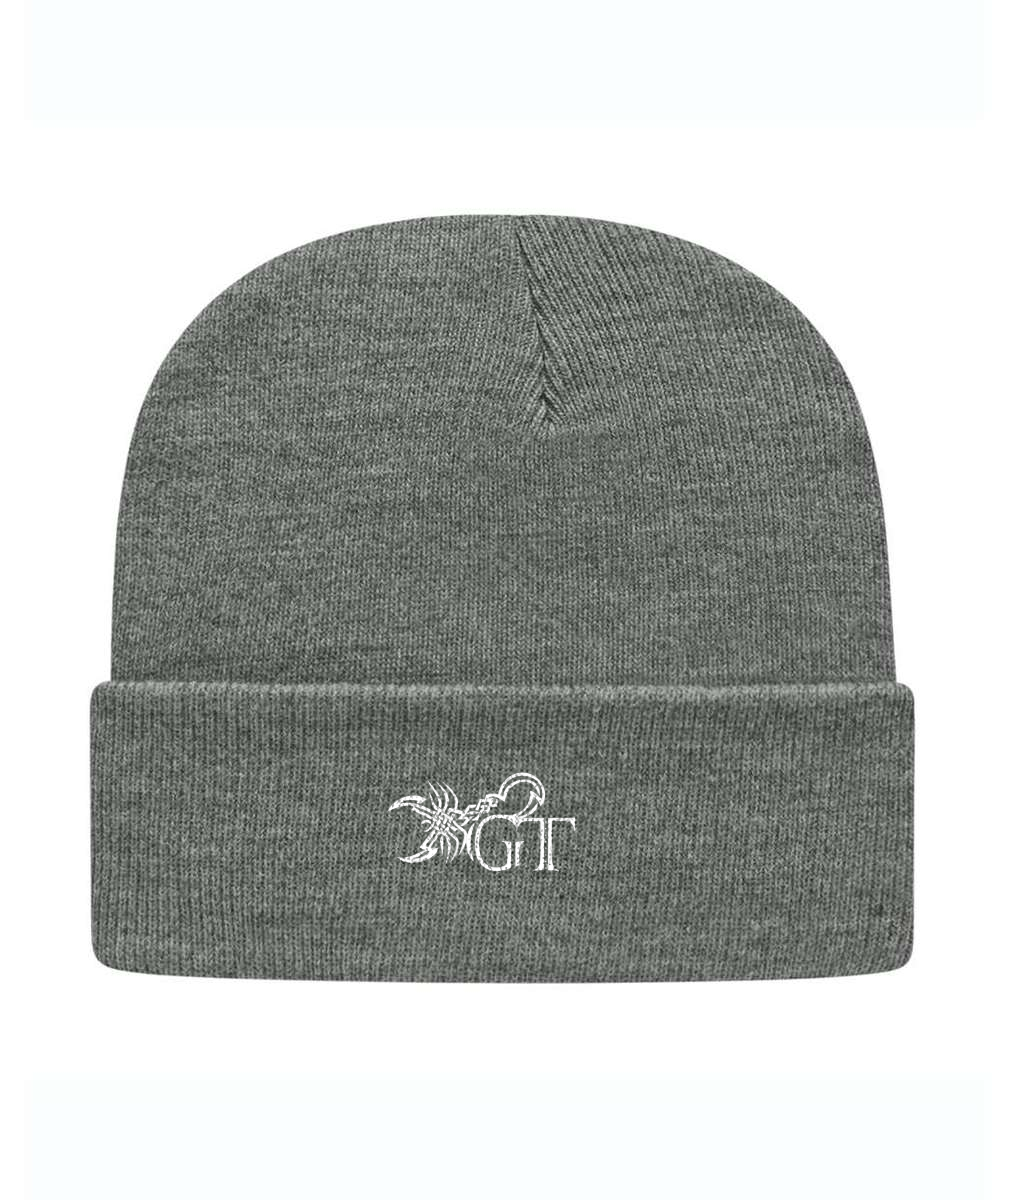 GT Scorpion Embroidered Knit Beanie